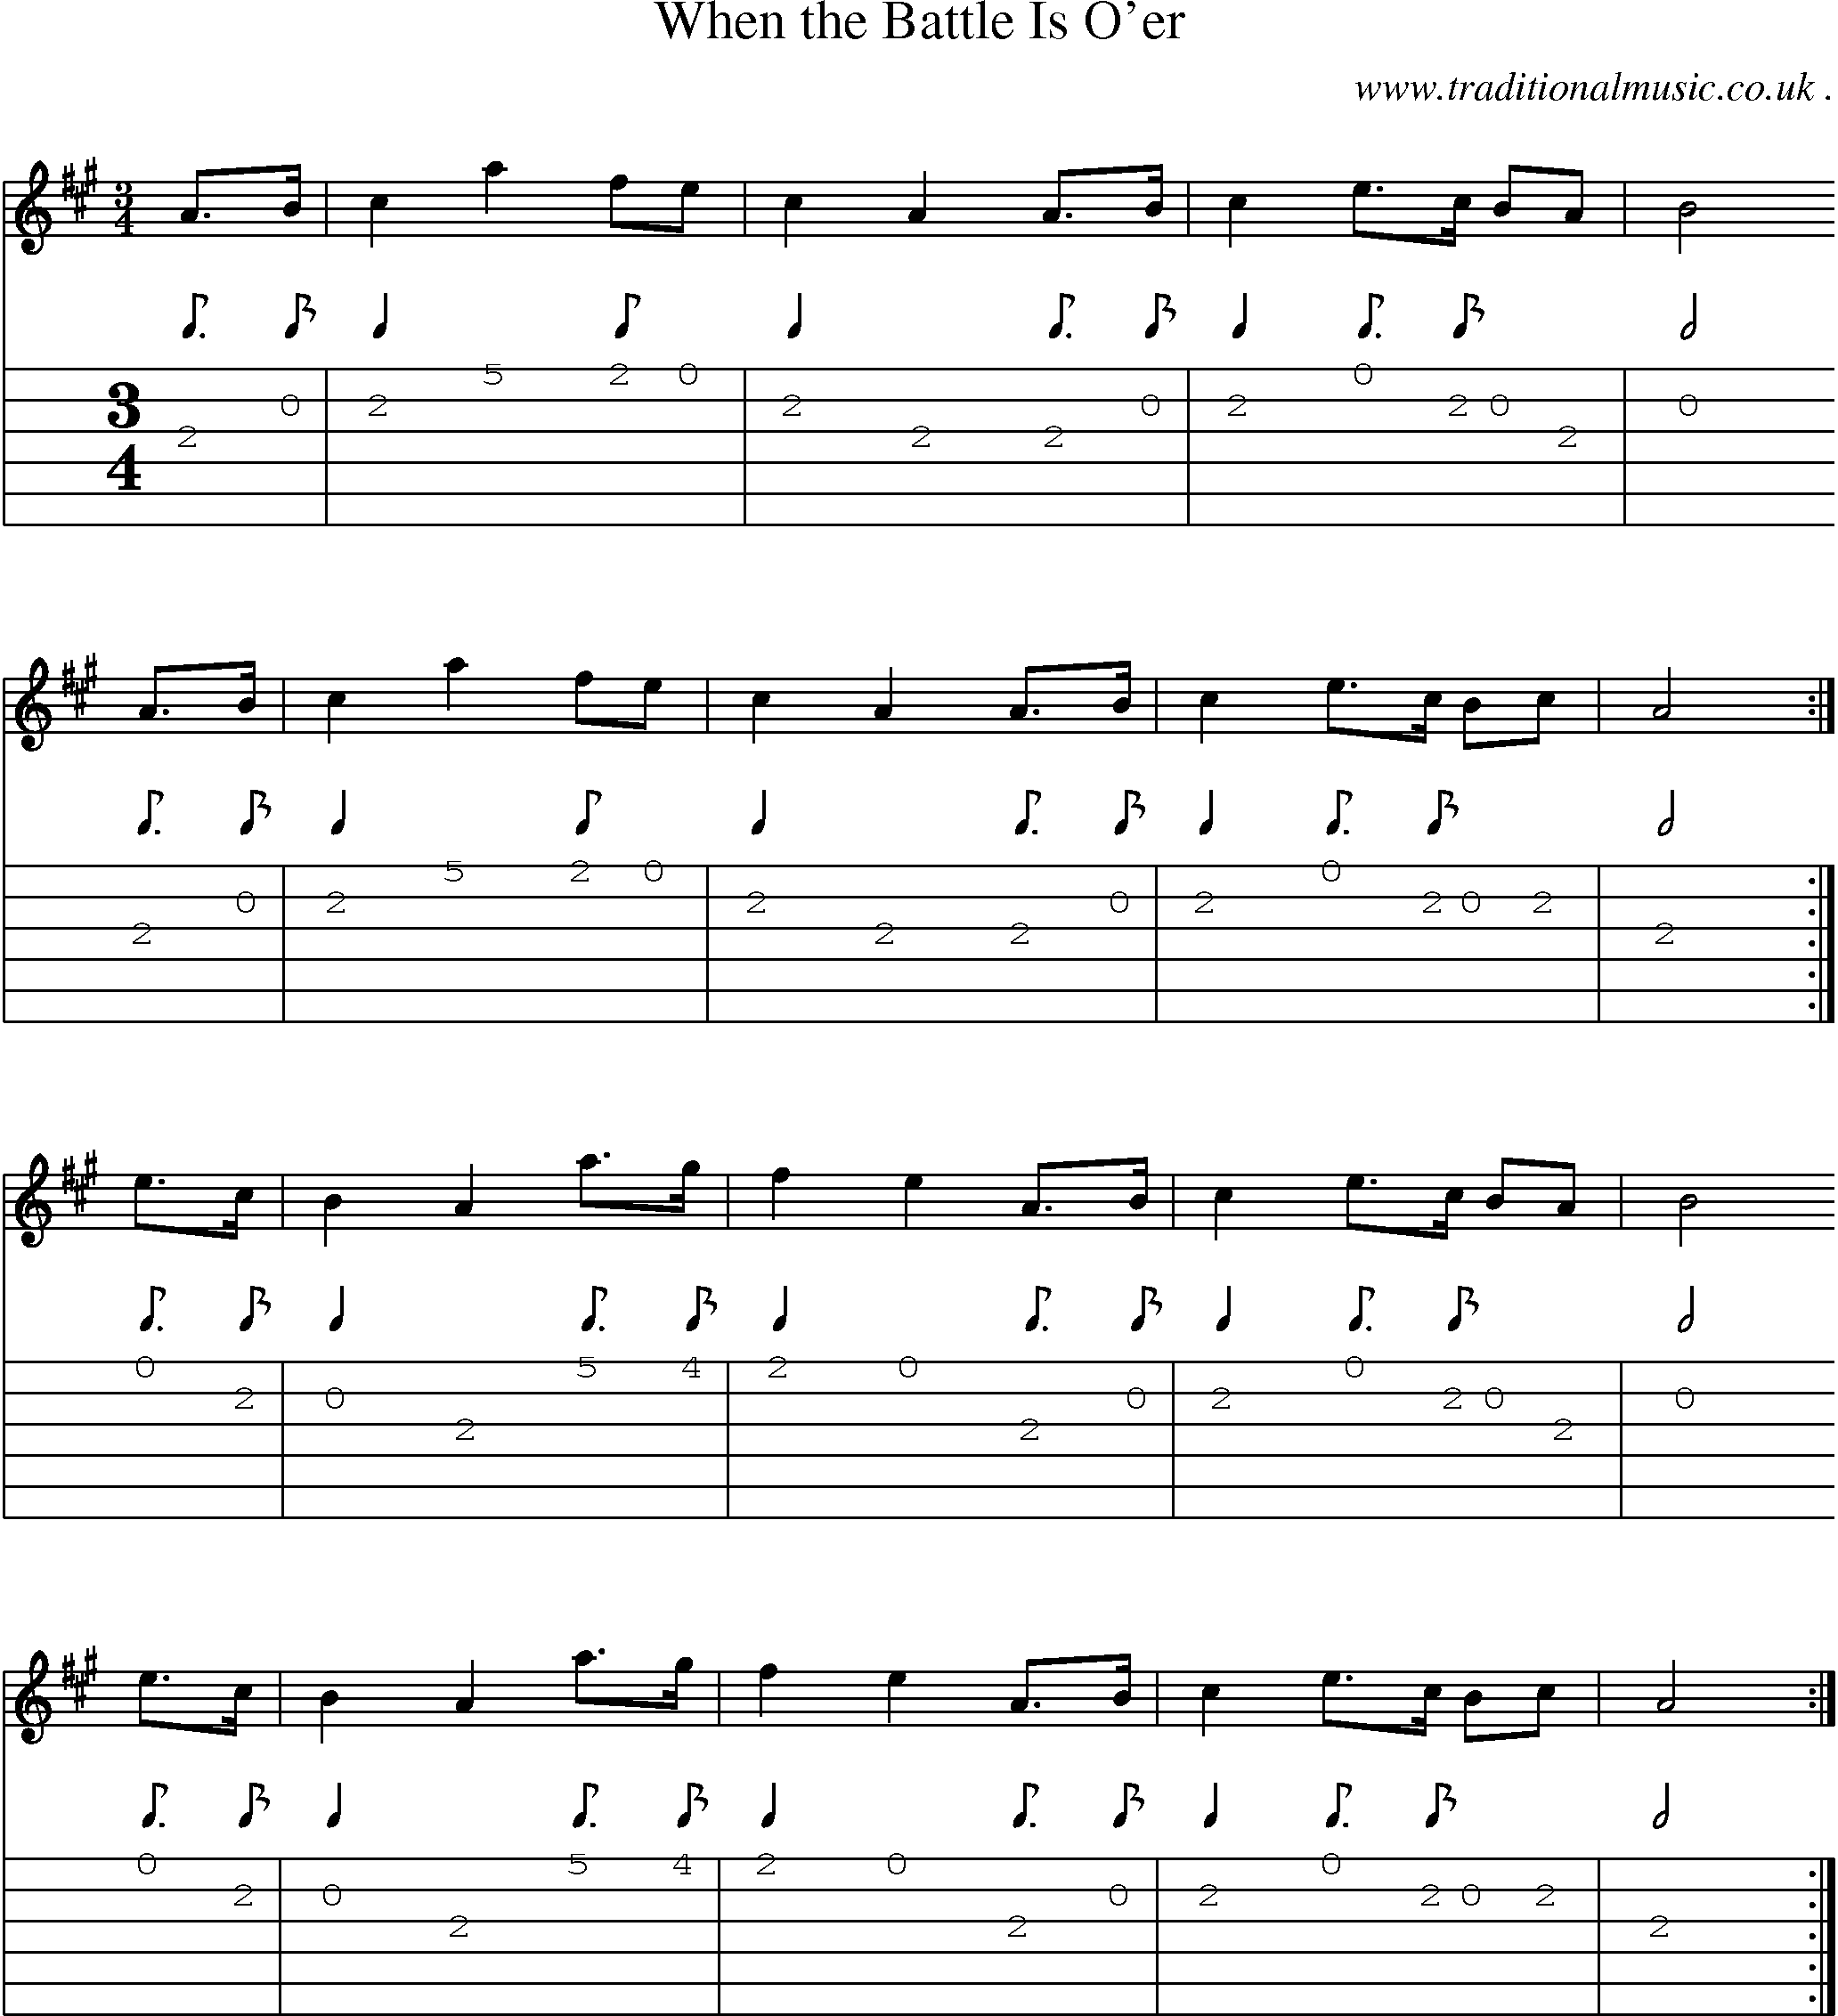 Sheet-music  score, Chords and Guitar Tabs for When The Battle Is Oer